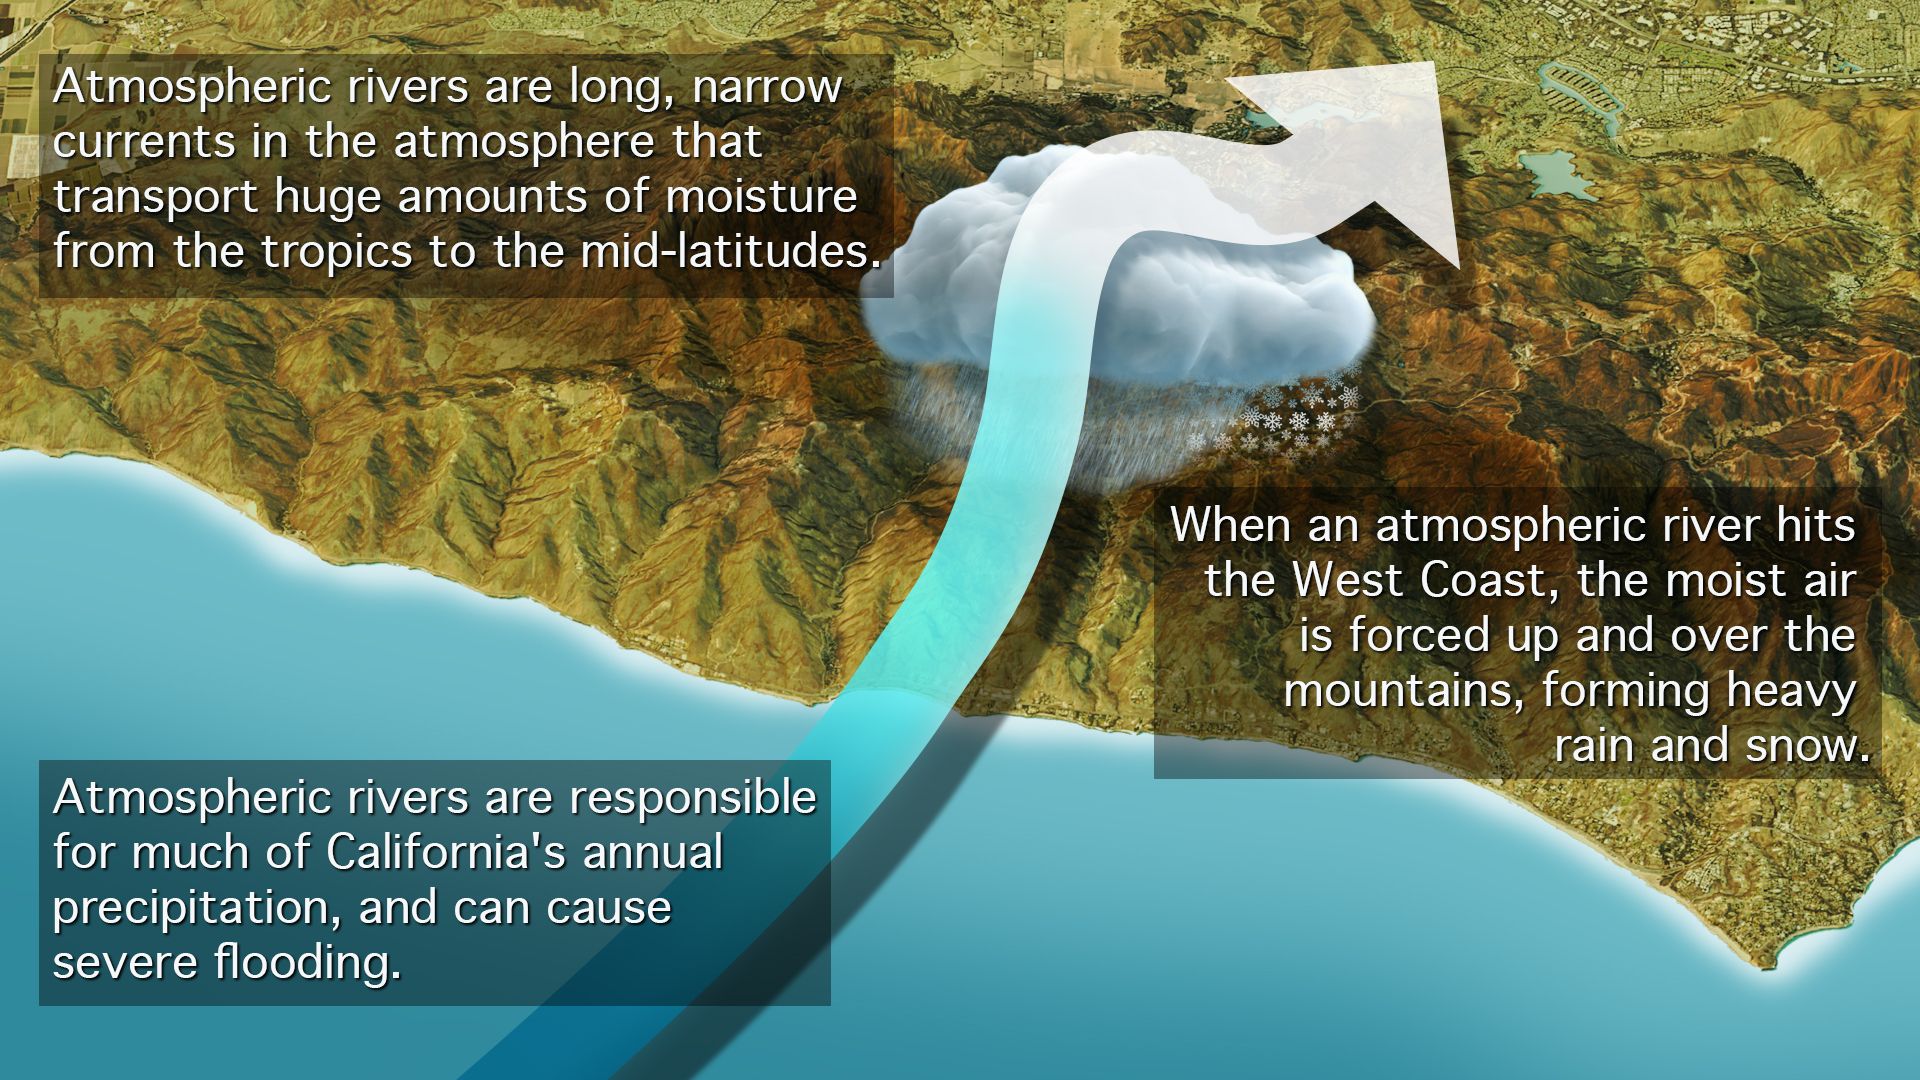 Diagram showing an atmospheric river hitting the West Coast and causing heavy precipitation.